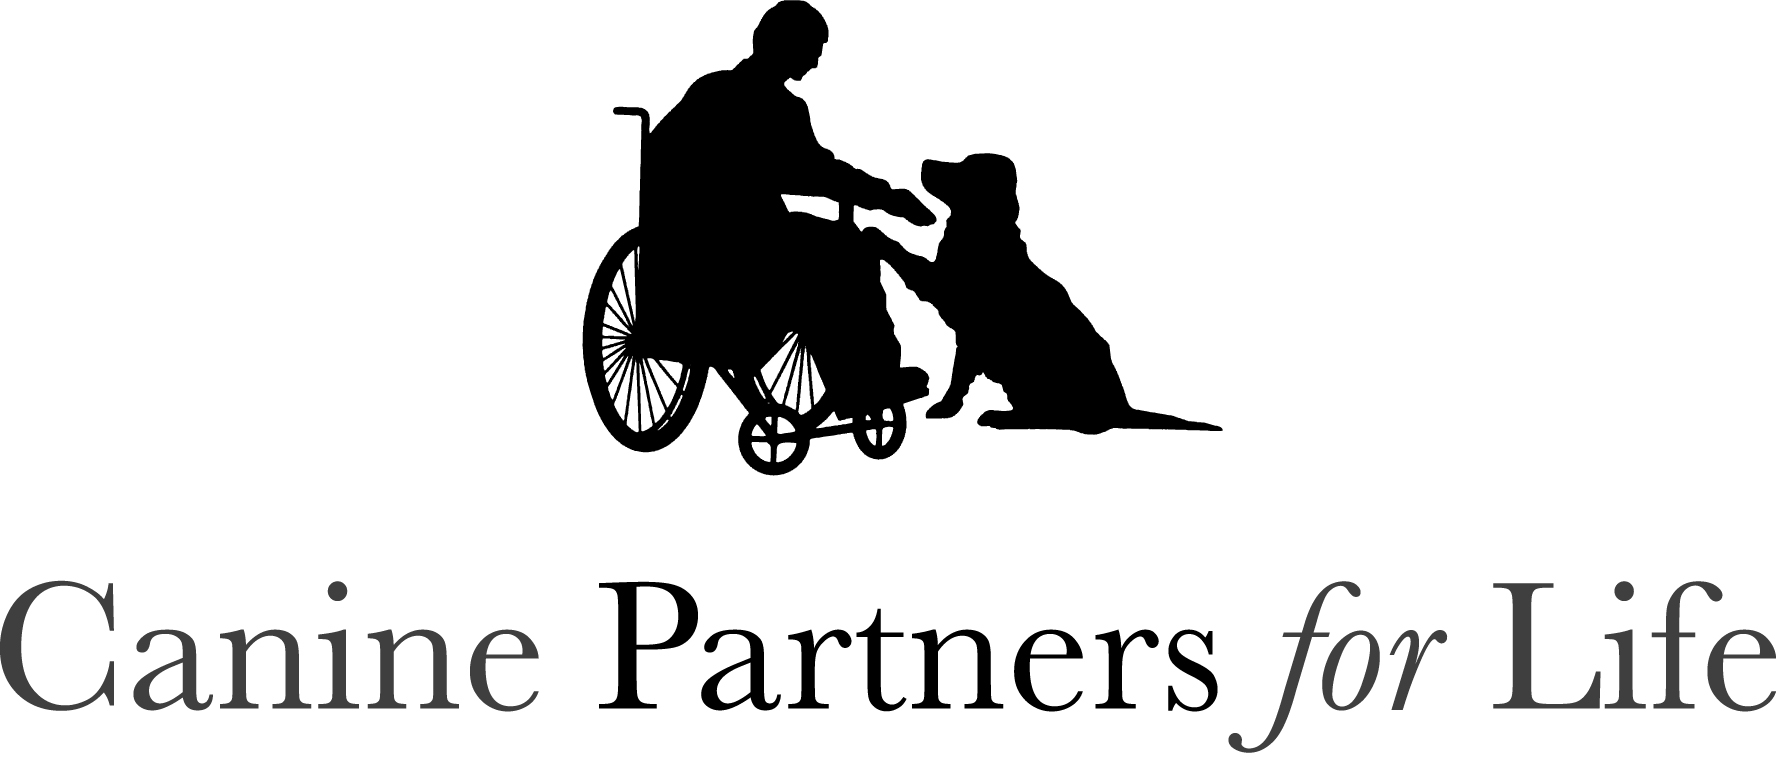 Canine Partners for Life (CPL) Logo